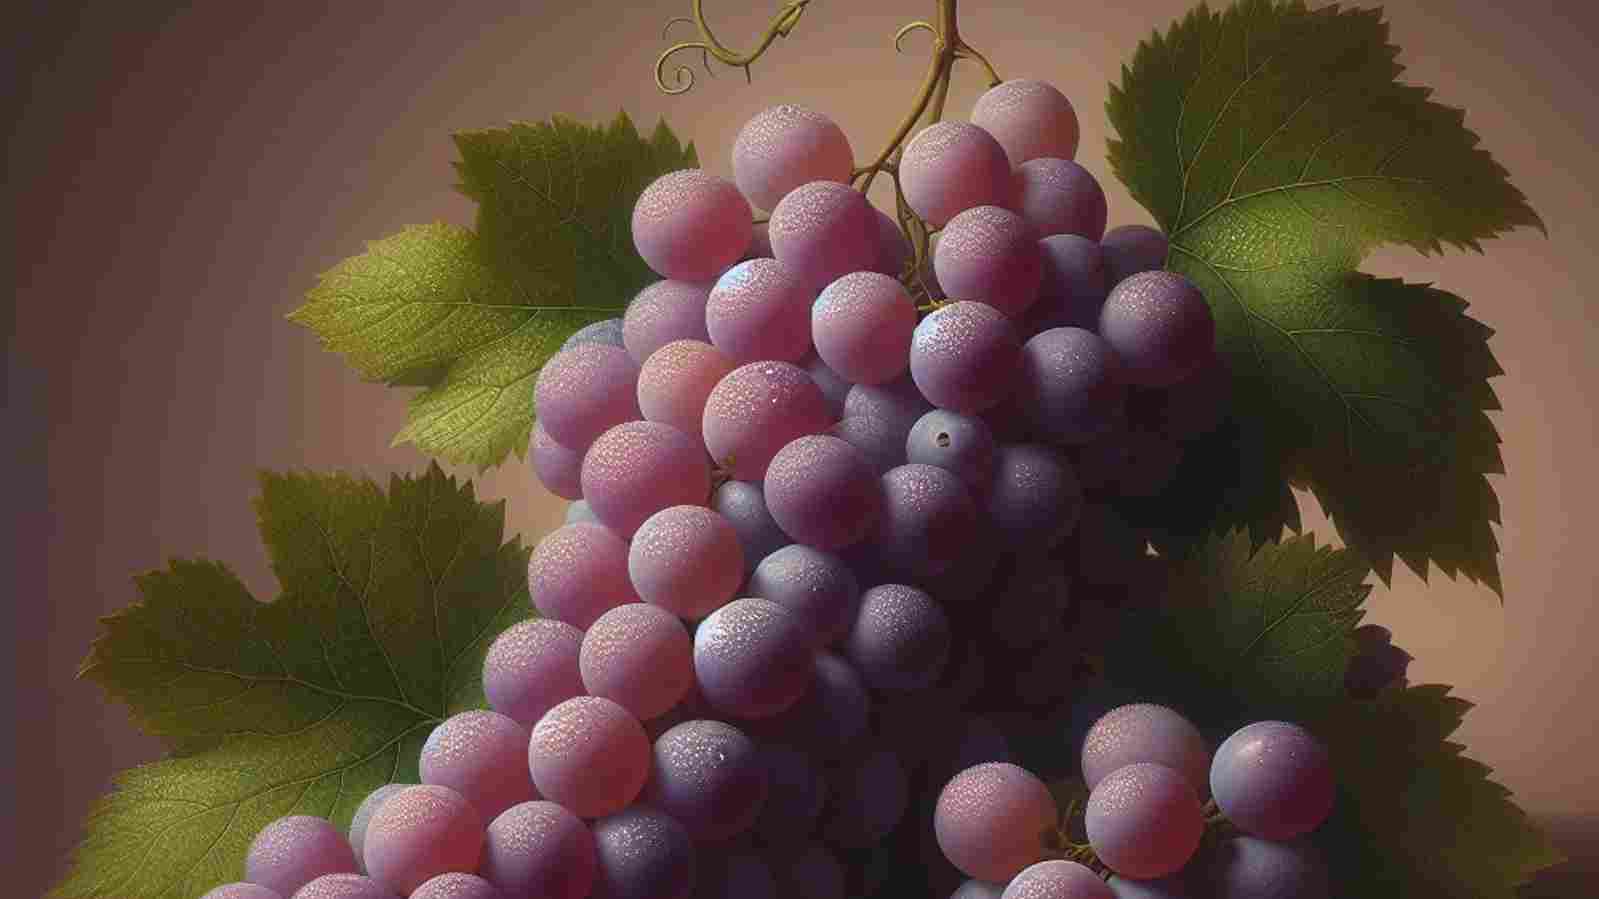 Spiritual Meaning of Smelling Grapes